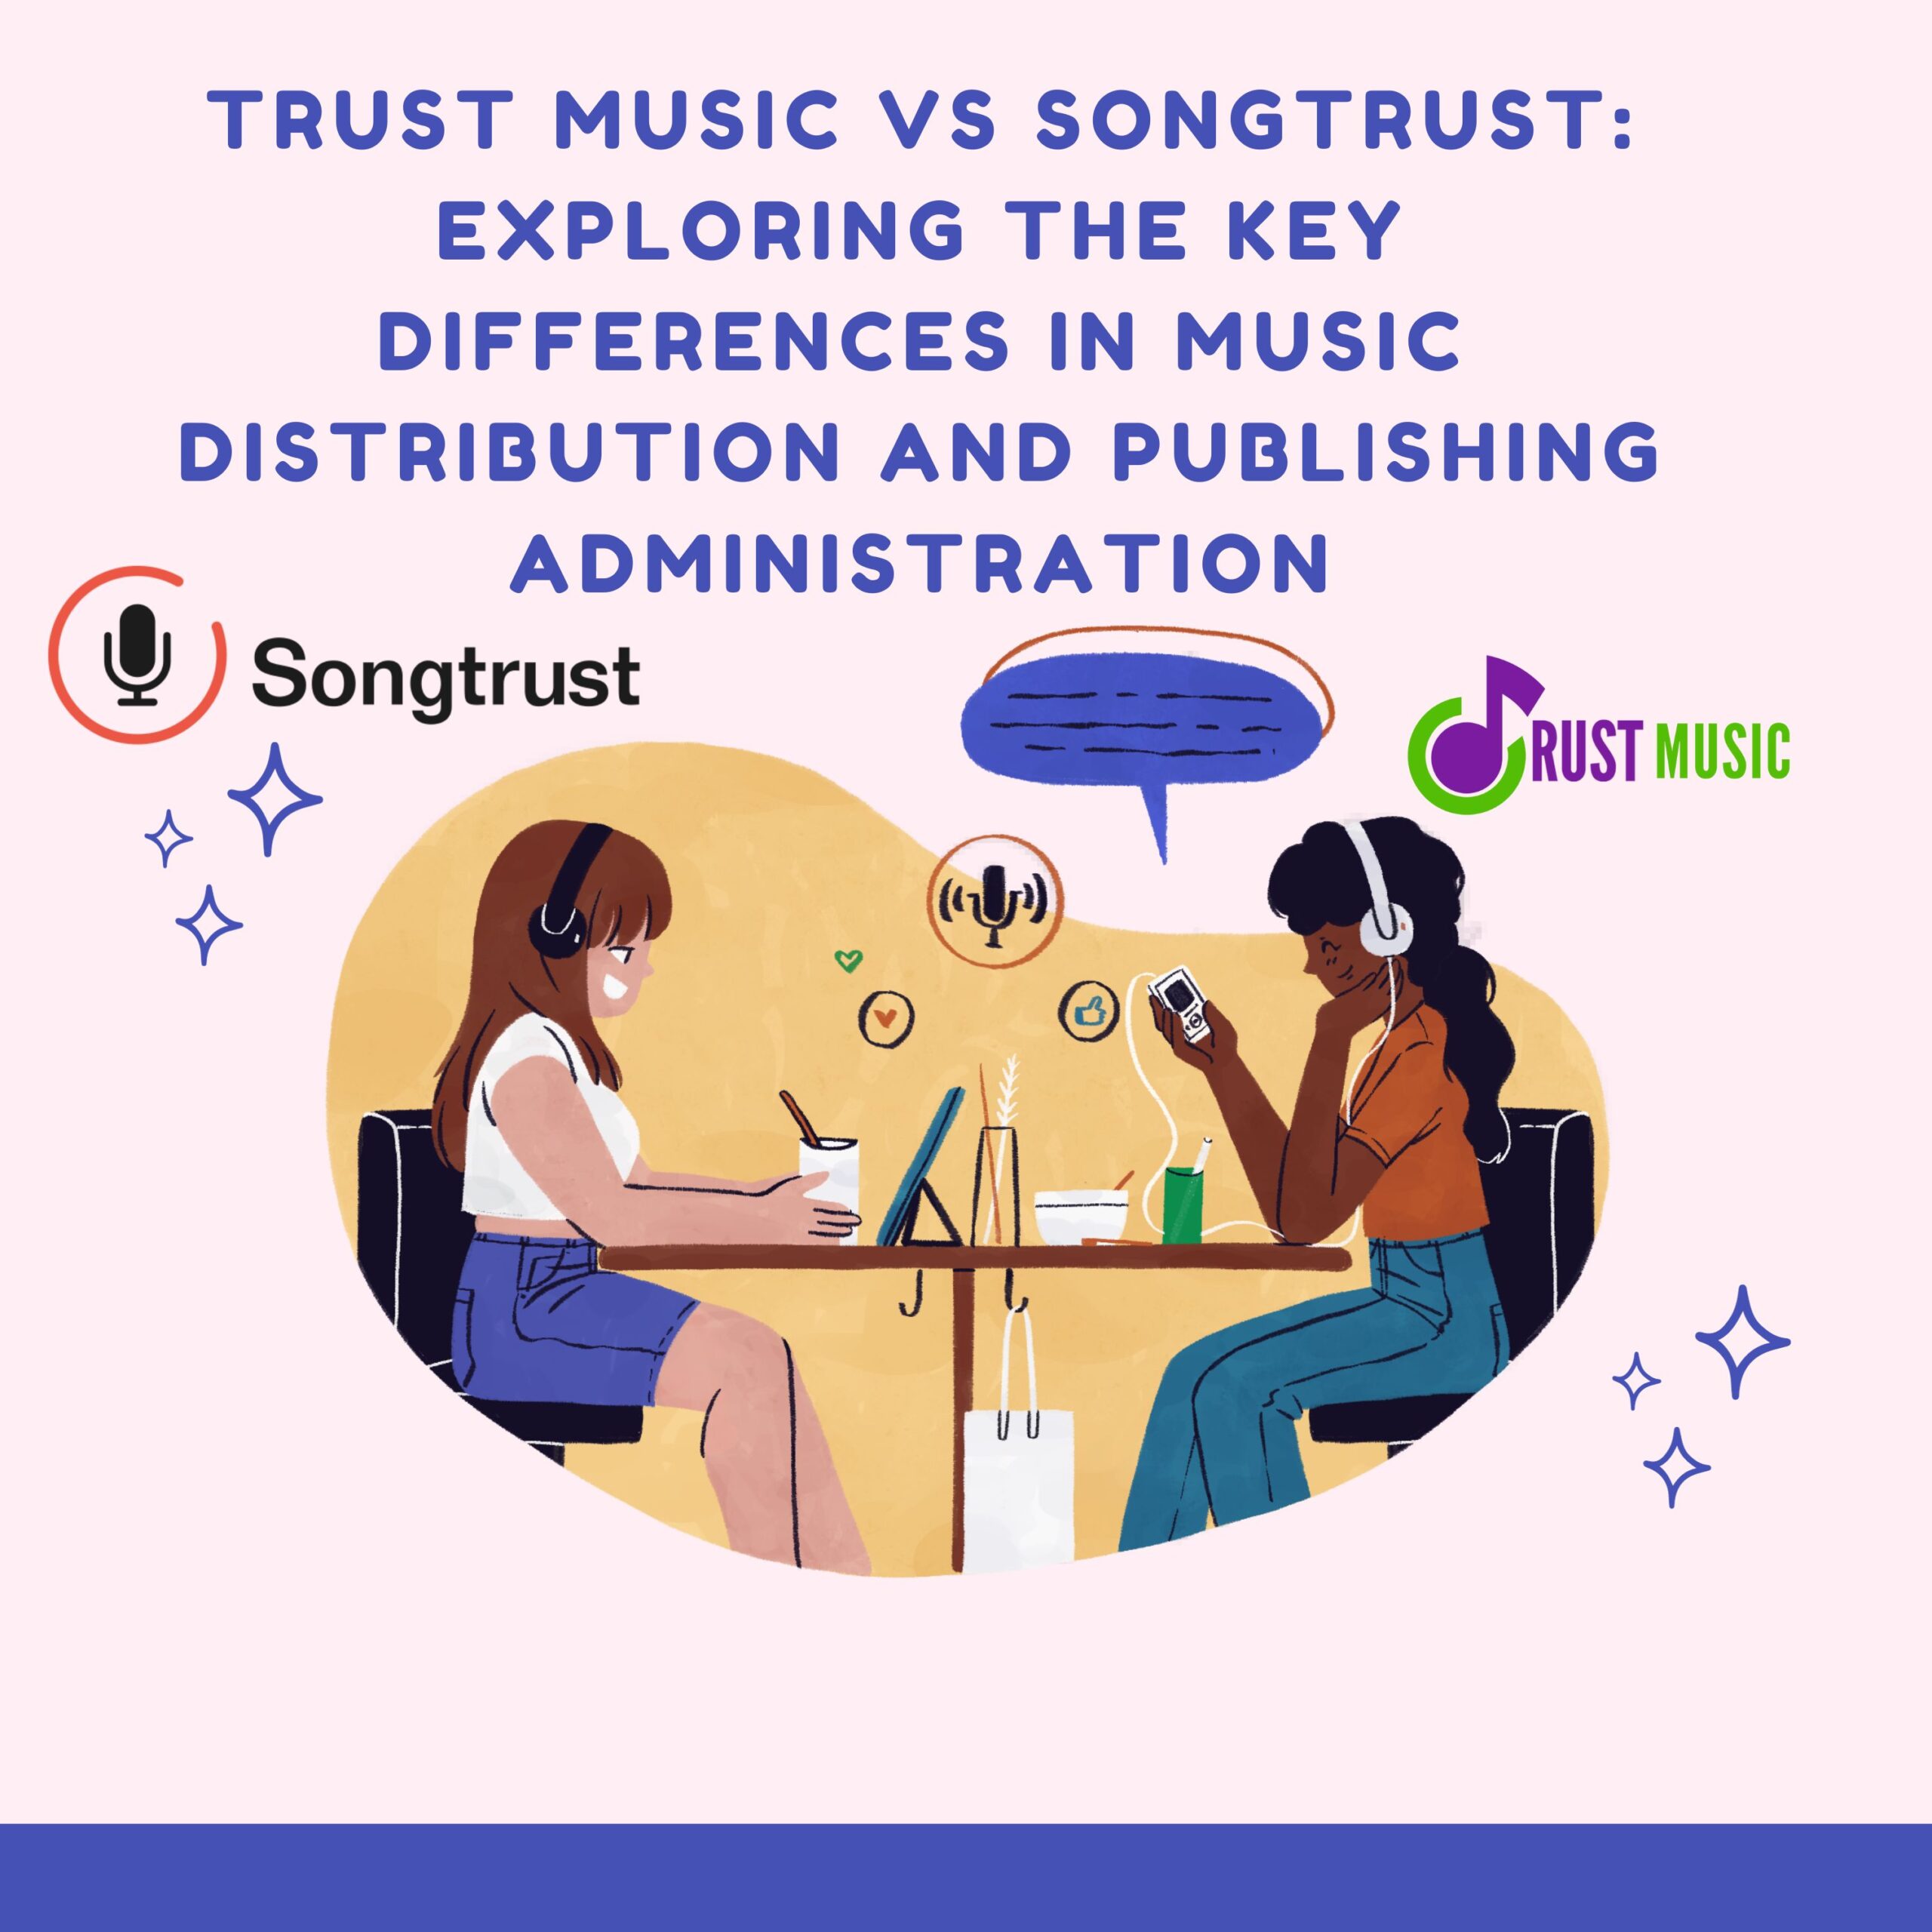 Trust Music Vs SongTrust: Exploring the Key Differences in Music Distribution and Publishing Administration